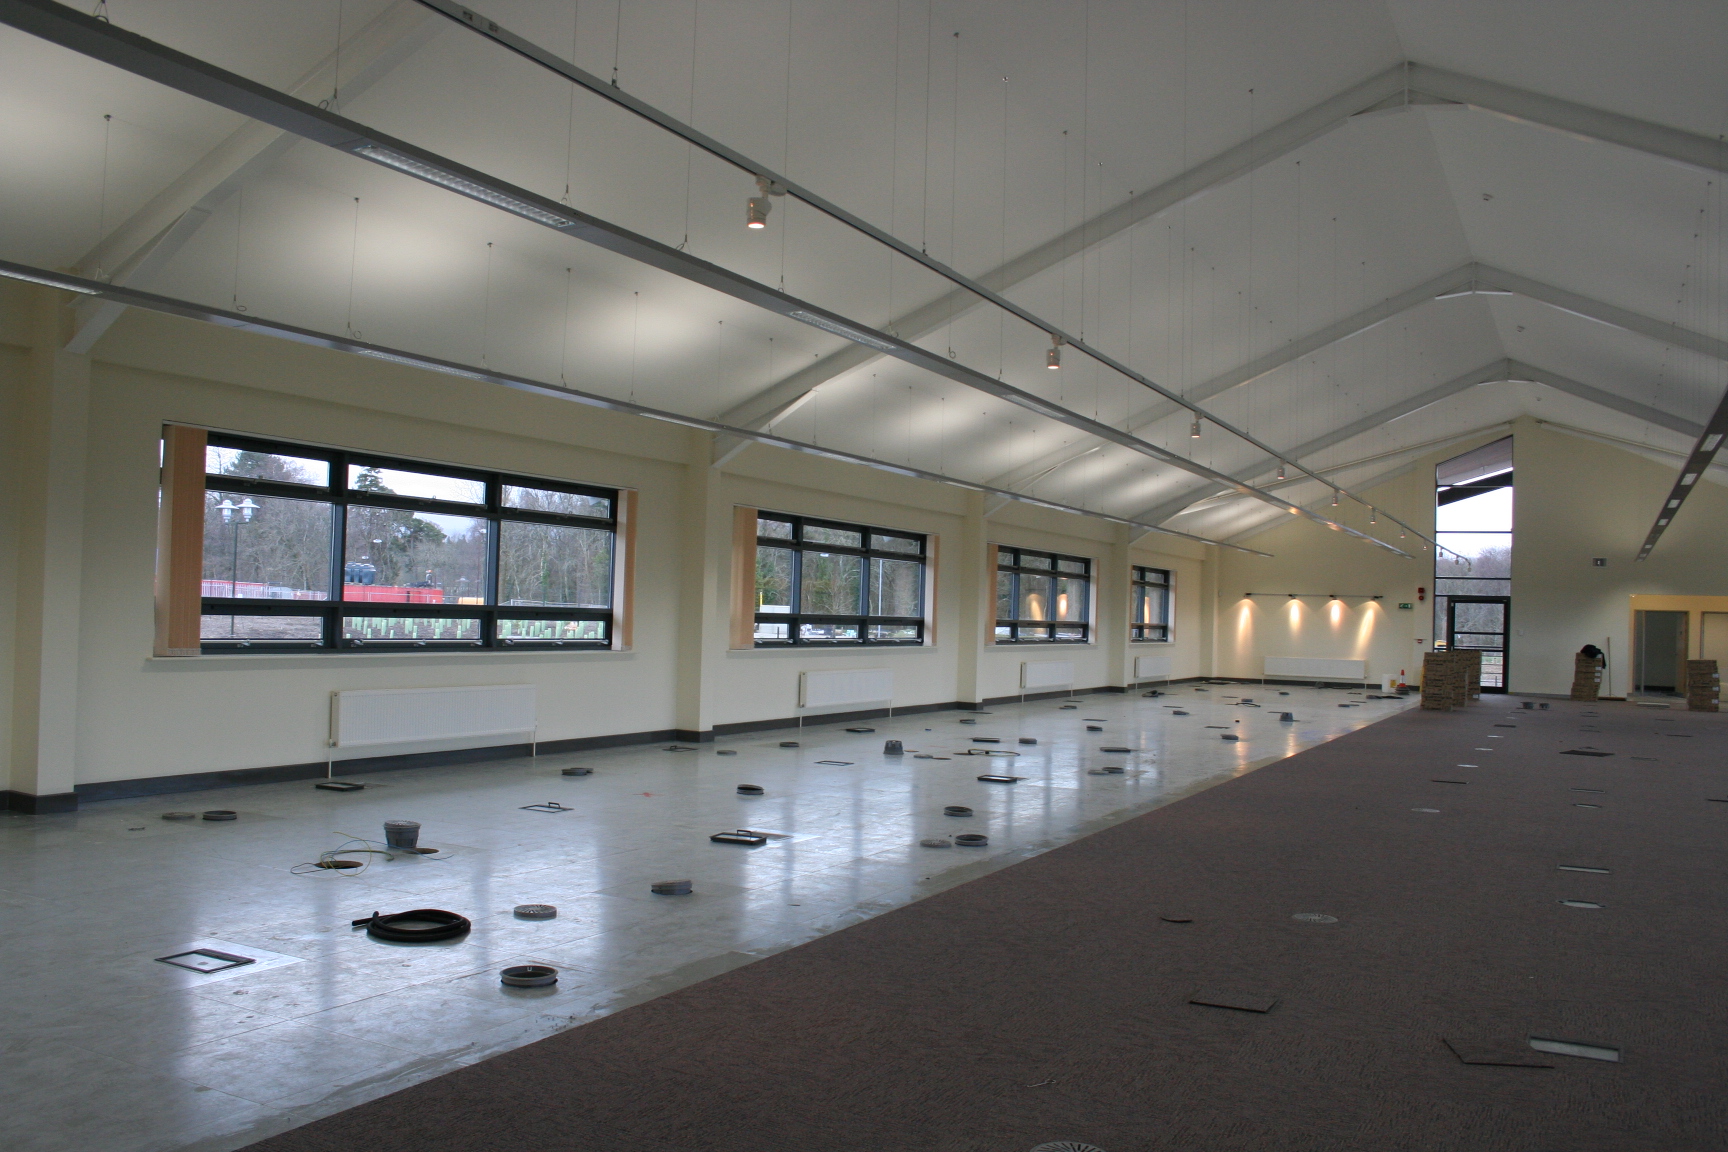   Dry lining and partitioning  